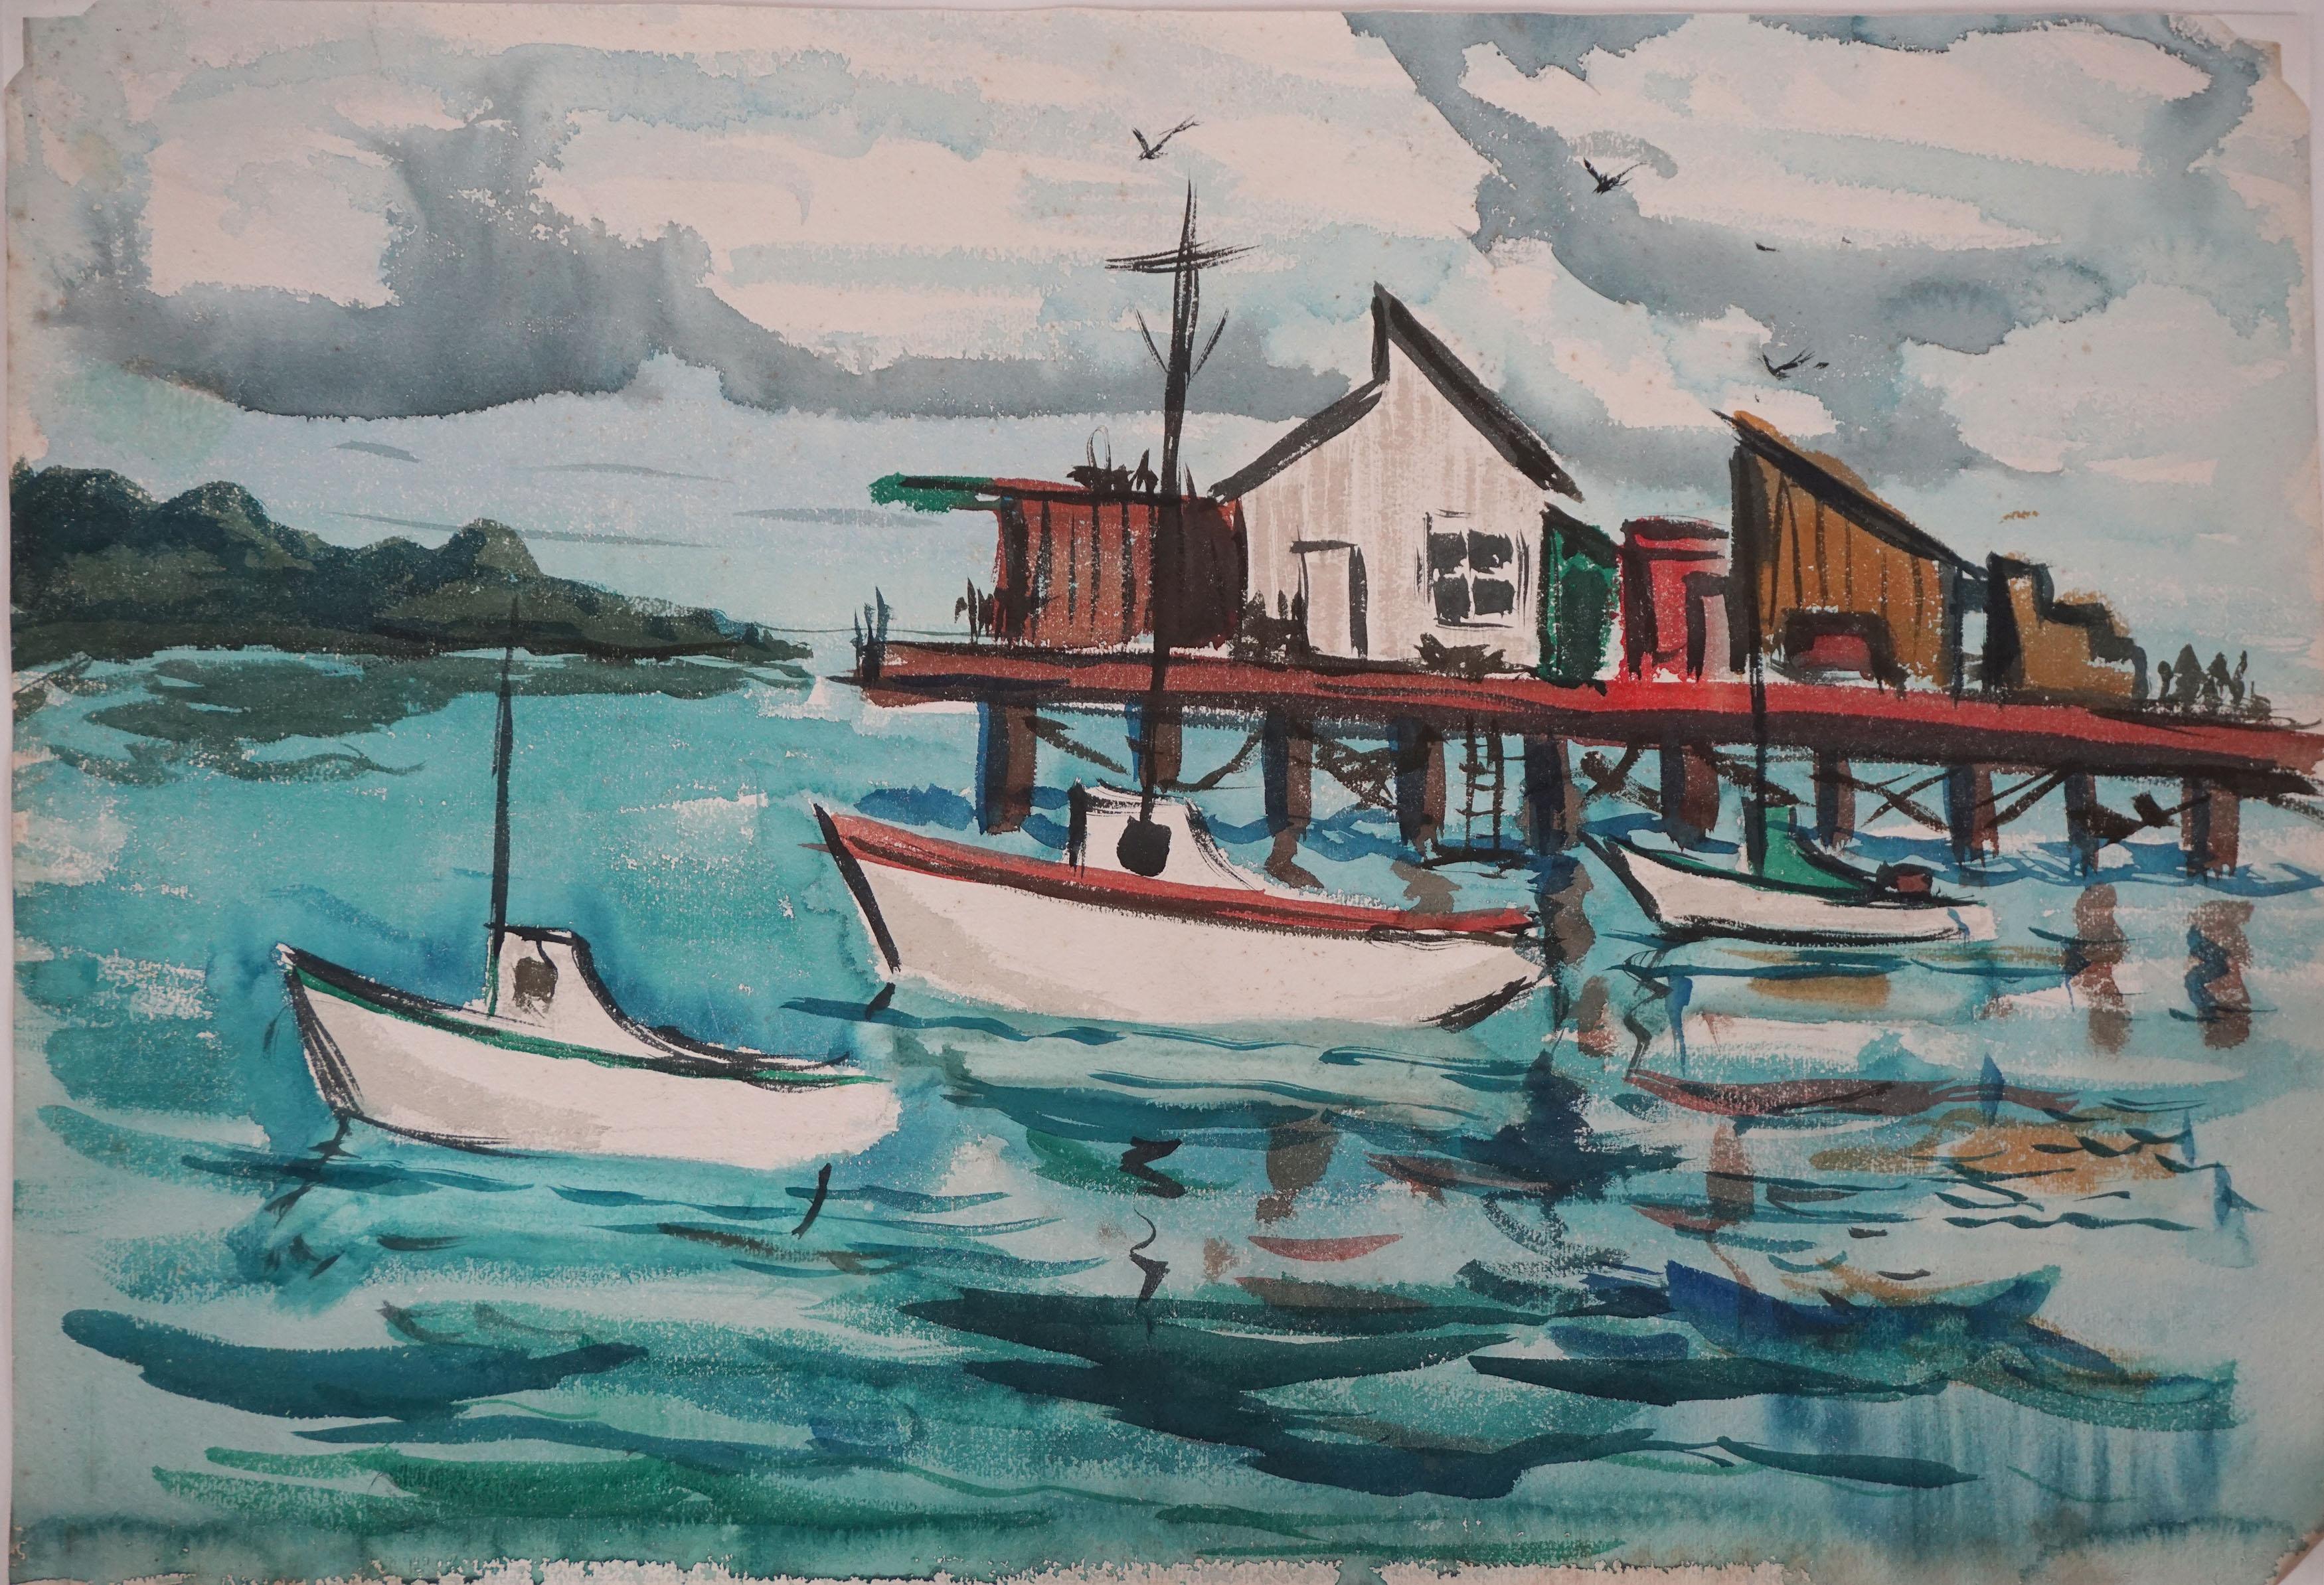 Mid Century Modern Nautica Landscape of Boats and Wharf in Acrylic on Paper

Vibrant mid century landscape by California artist Bertram Spencer (American, 1918-1992). Three sailboats bob in the vivid aqua water with wharf with billowy clouds high